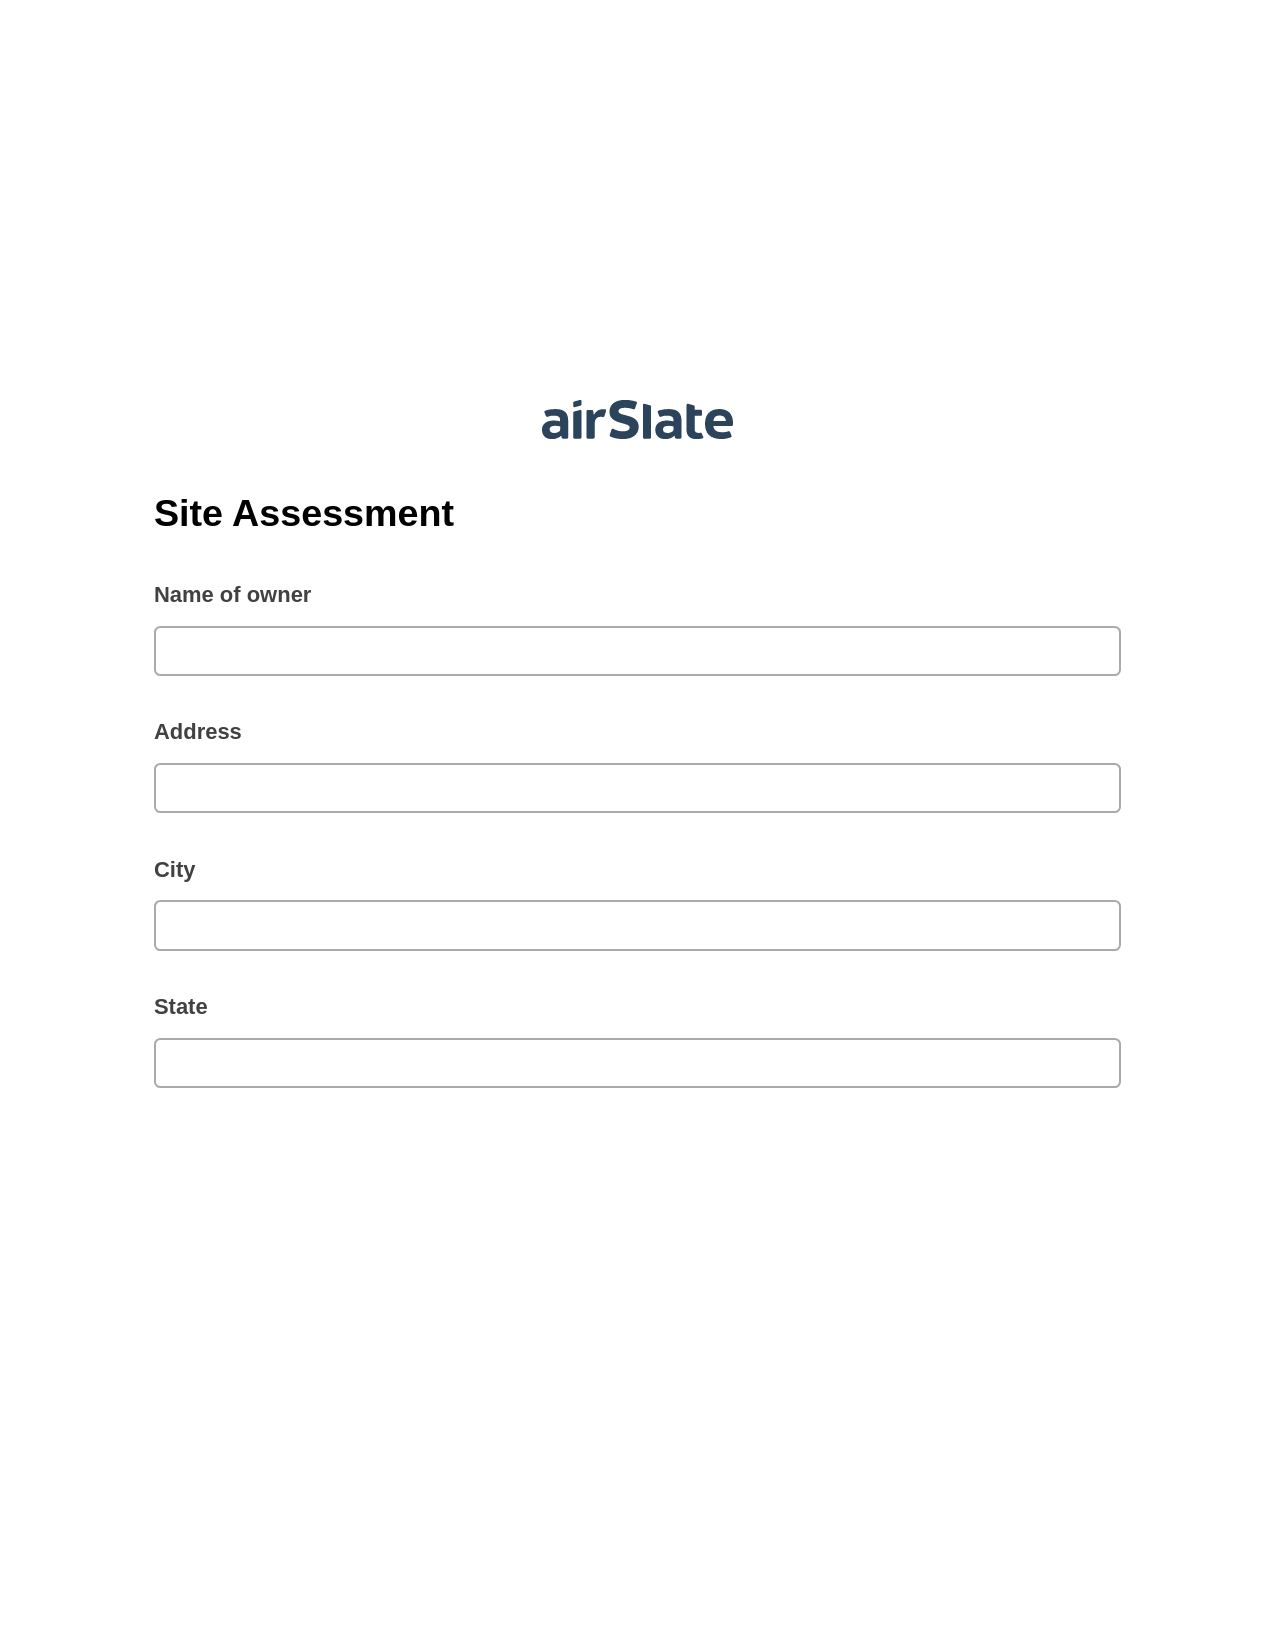 Site Assessment Pre-fill from Excel Spreadsheet Bot, Unassign Role Bot, Webhook Postfinish Bot